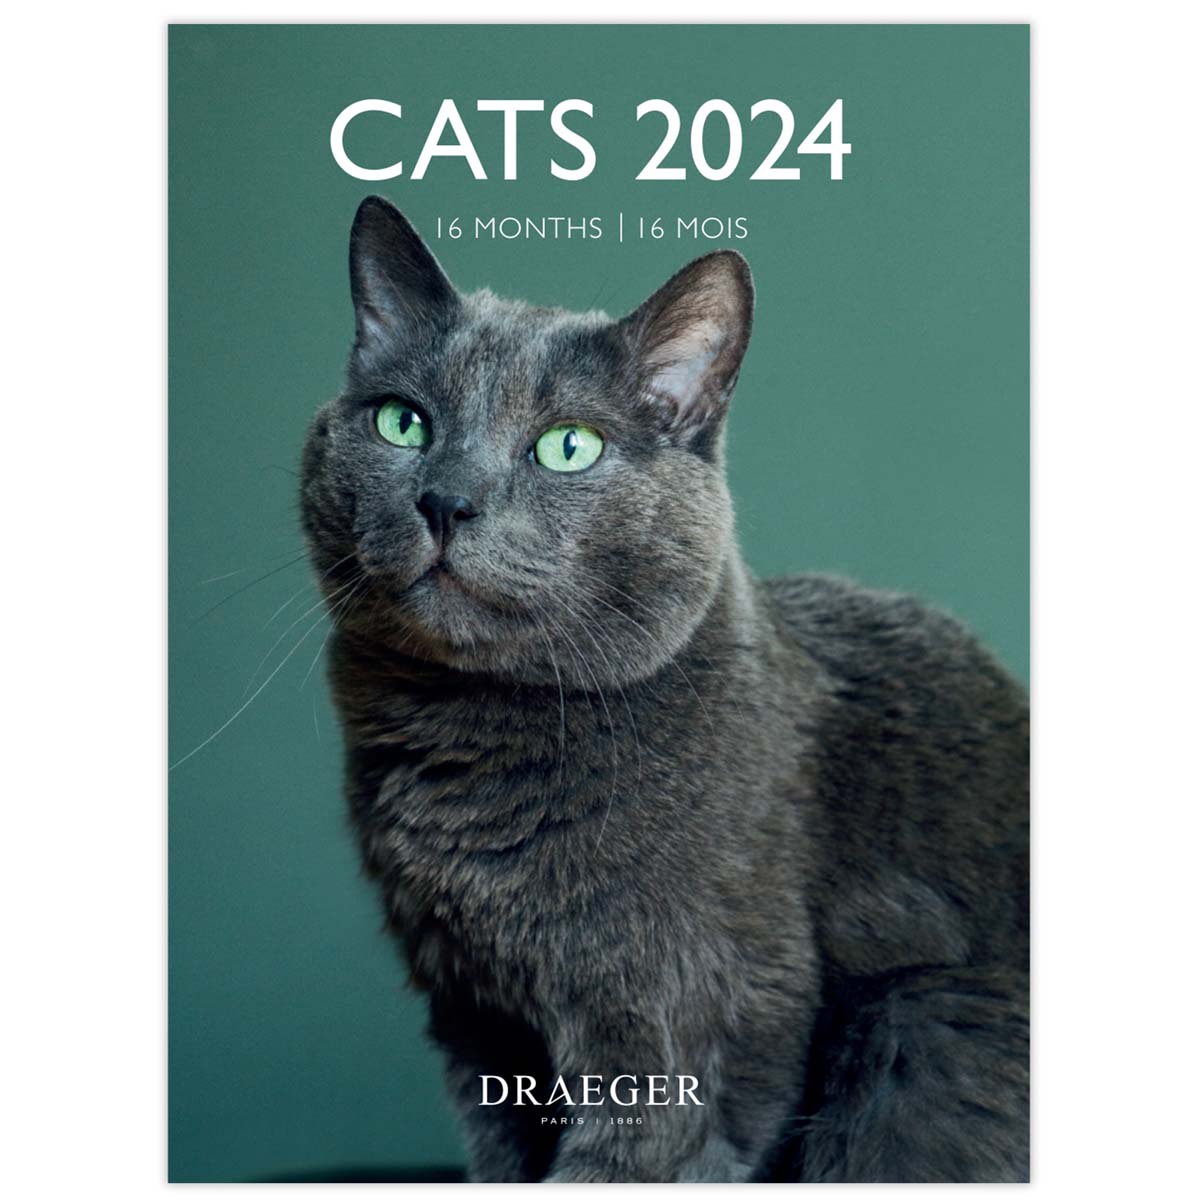 Calendrier 2024 Chats - 15.5 x 18 cm